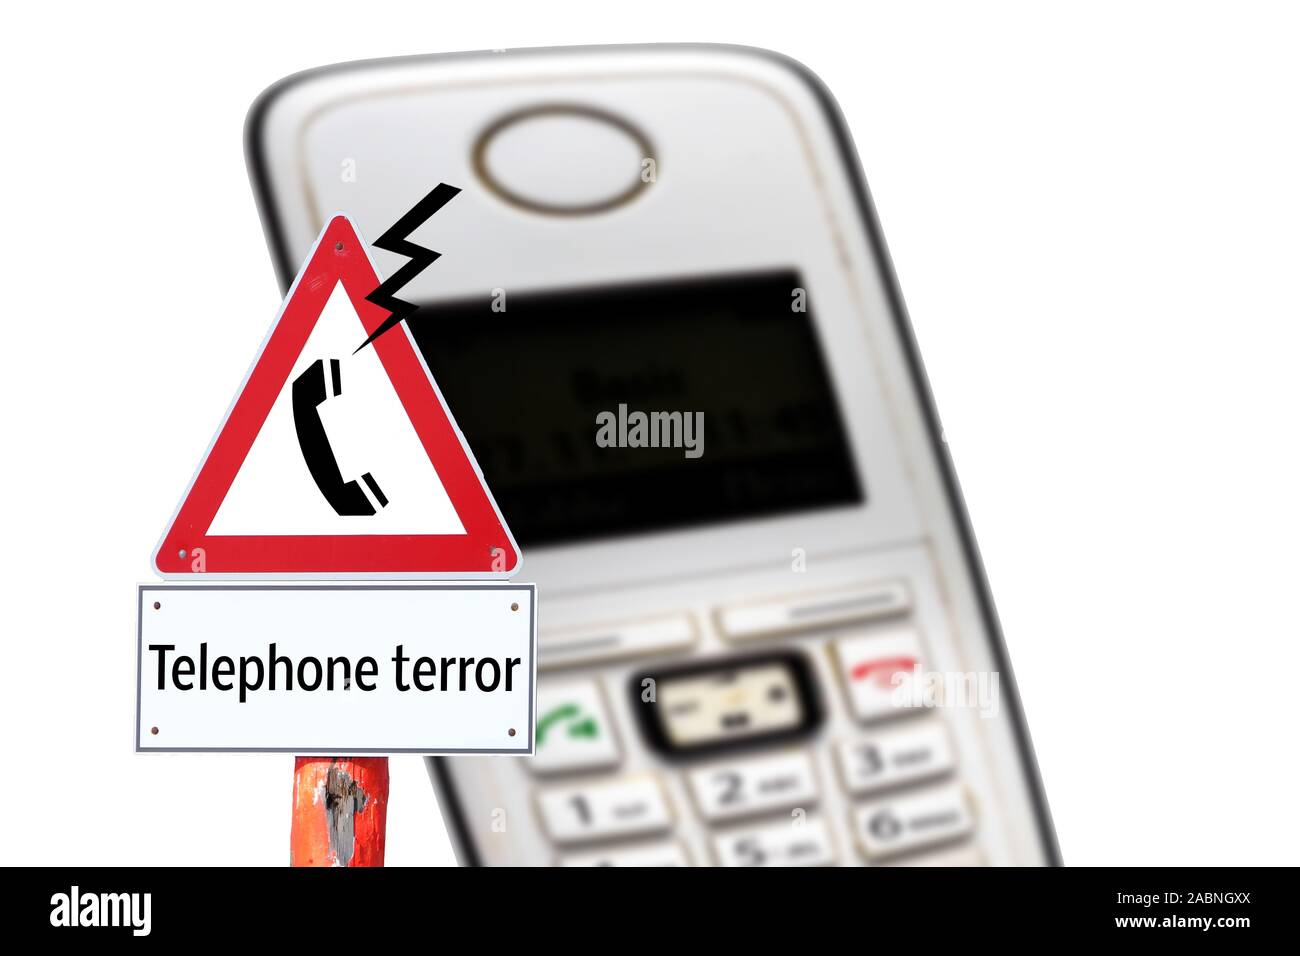 Attention telephone terror warning sign isolated Stock Photo